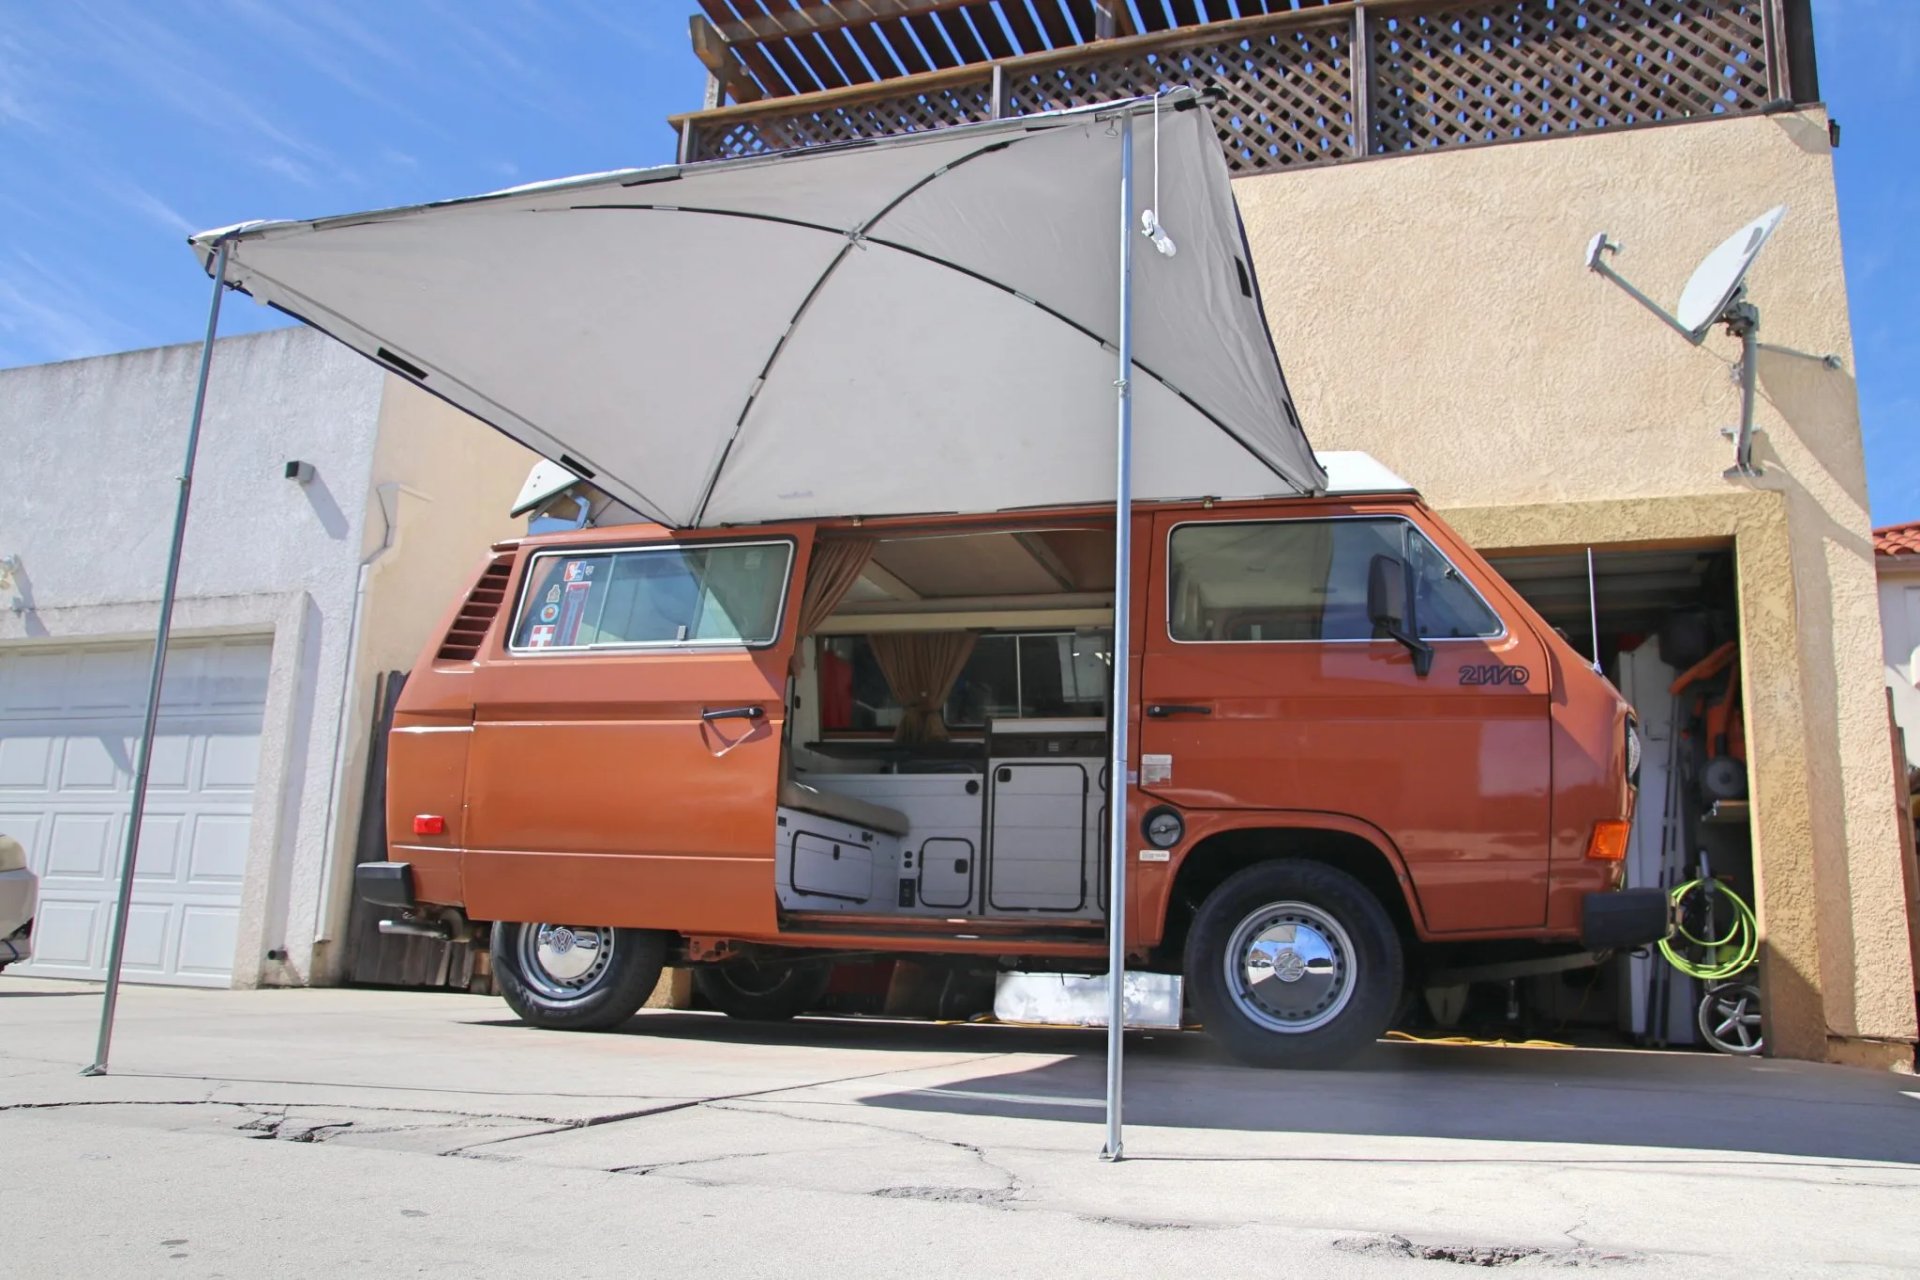 Cute 1980 Volkswagen Vanagon Westfalia Is Everything You Need, Sells With  No Reserve - autoevolution